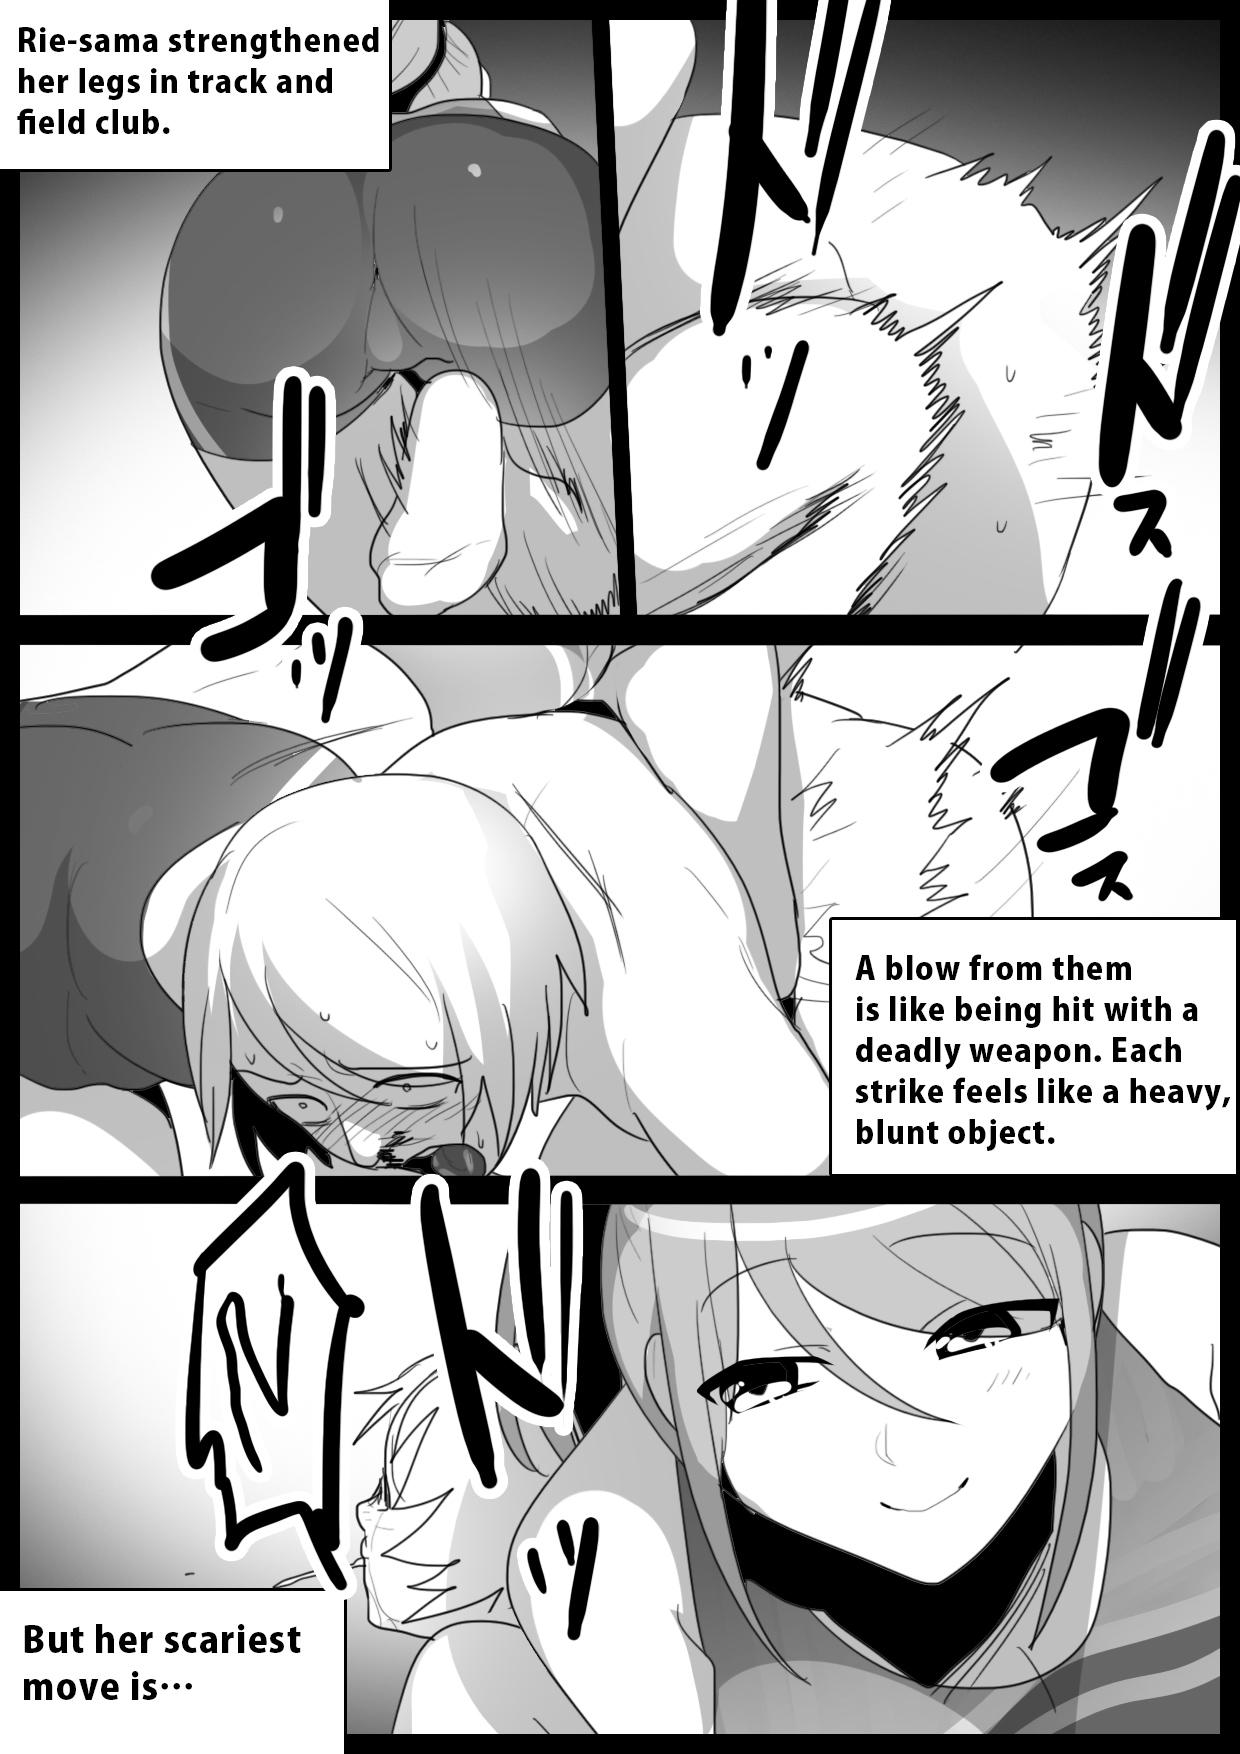 Hardsex Spin-Off of Girls Beat by Rie - Original Mature - Page 6